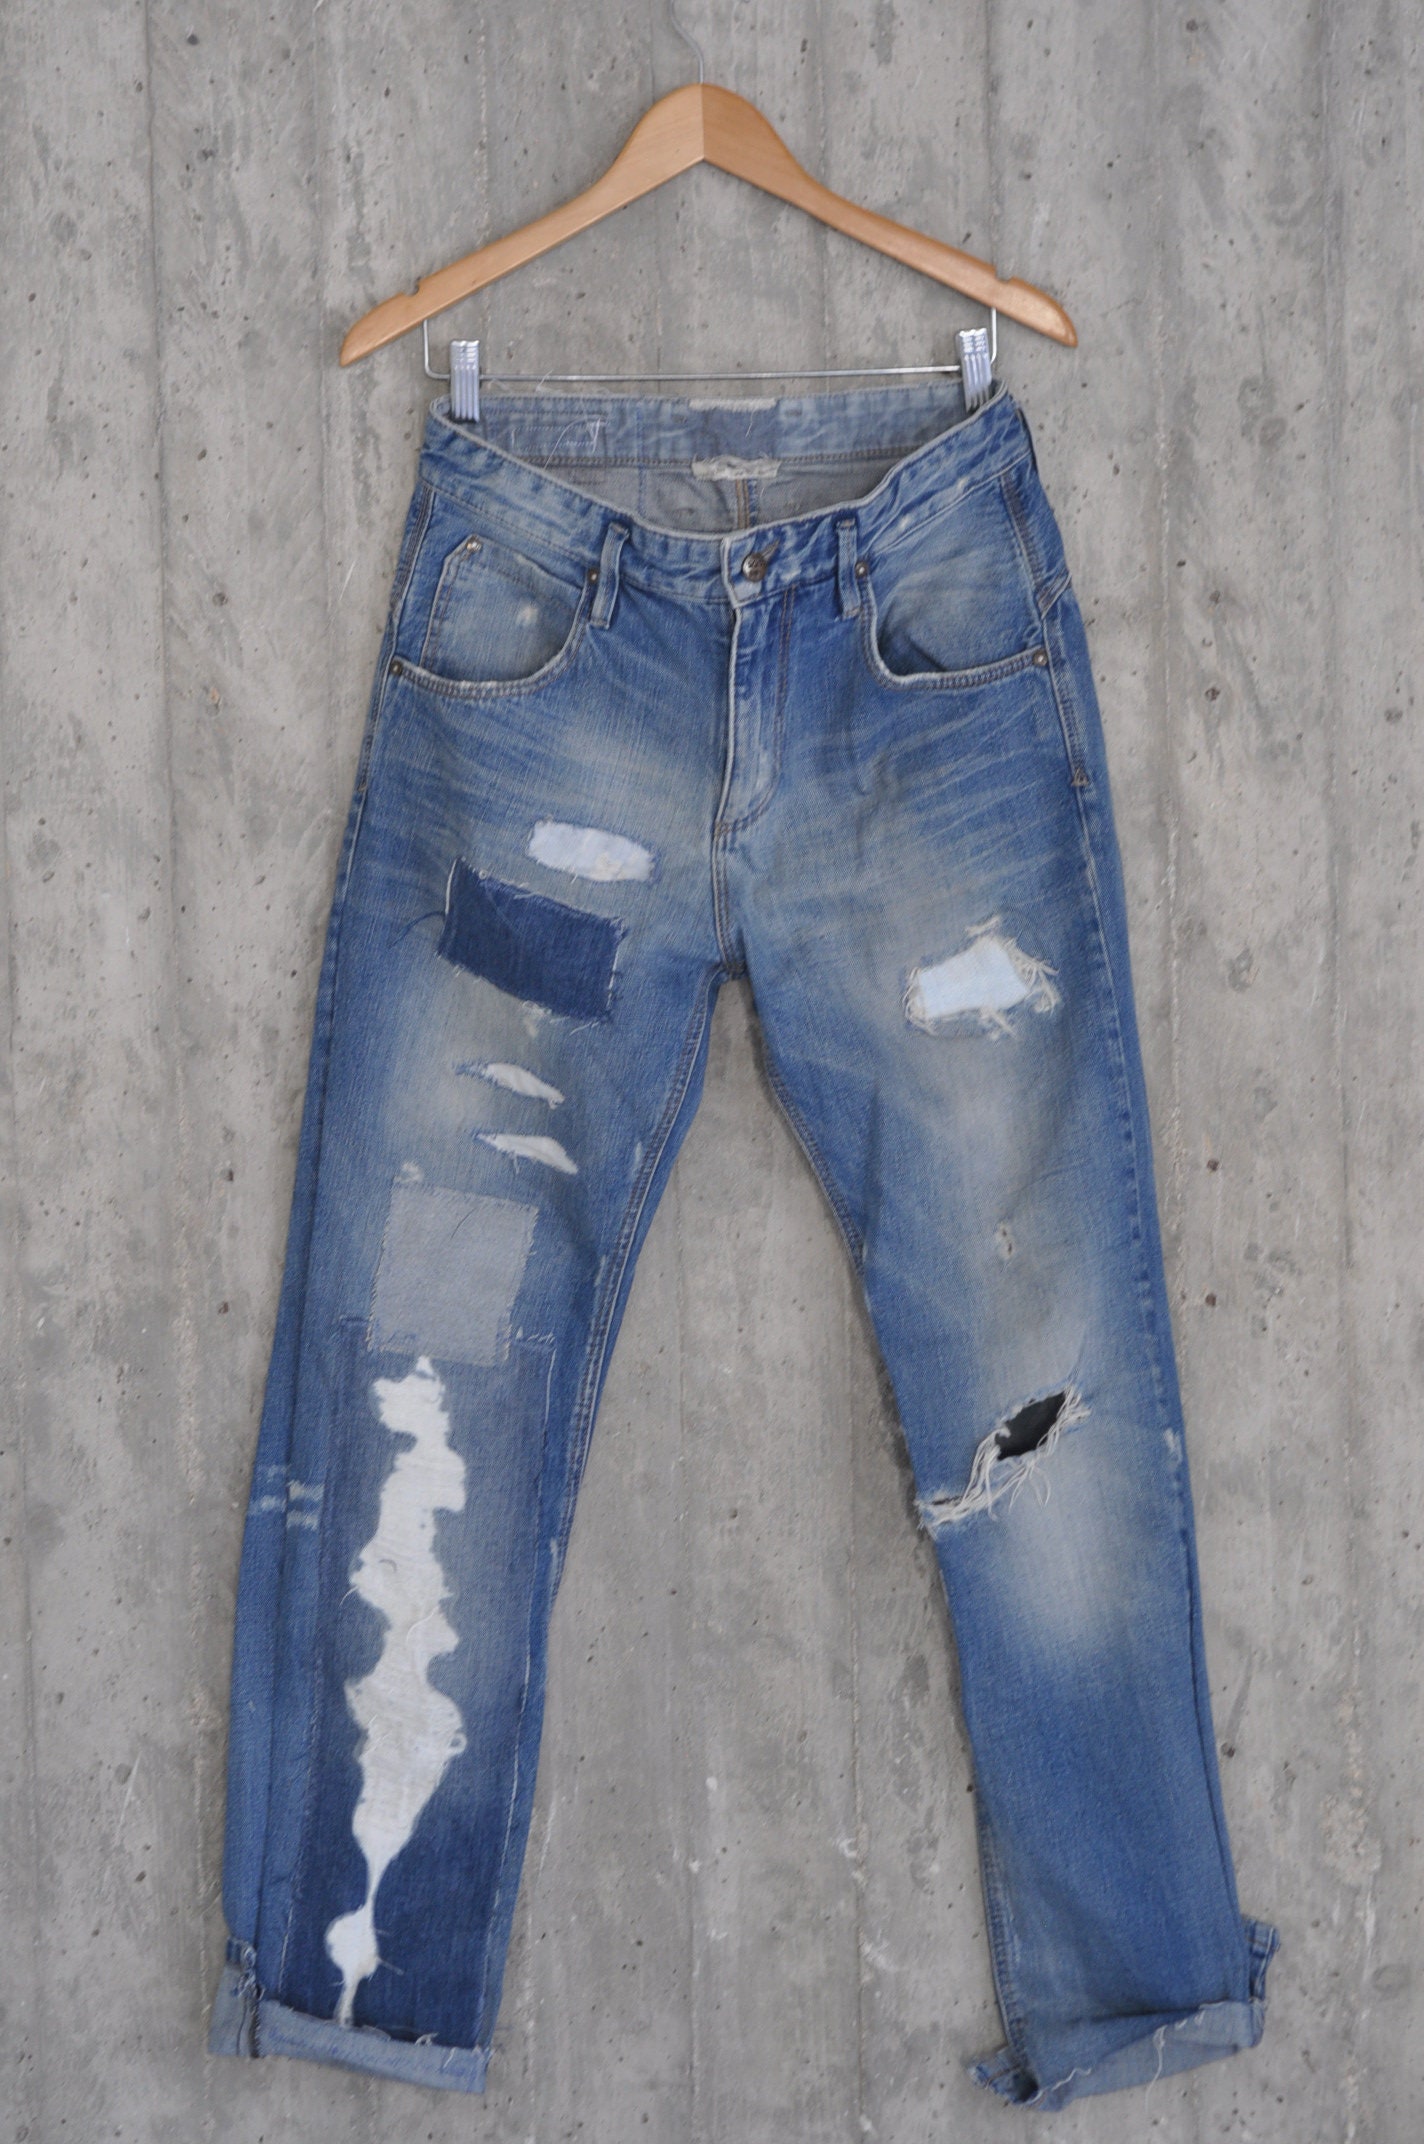 Vintage Levis 501 Jeans Ripped Distressed Levis Jeans With - Etsy Israel